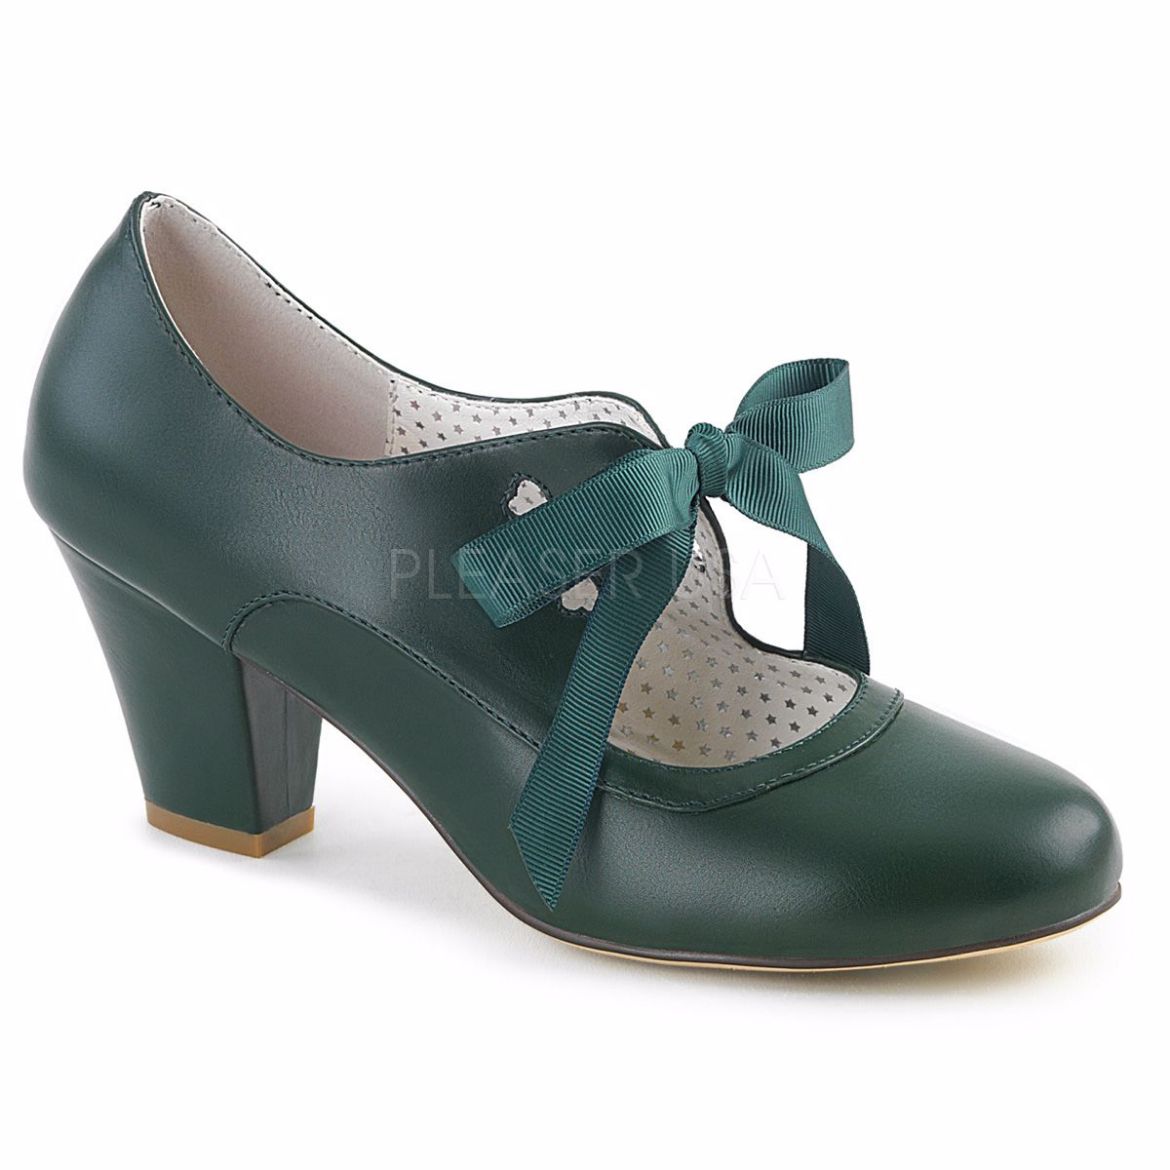 Product image of Pin Up Couture Wiggle-32 Dark Green Faux Leather, 2 1/2 inch (6.4 cm) Cuben Heel Court Pump Shoes